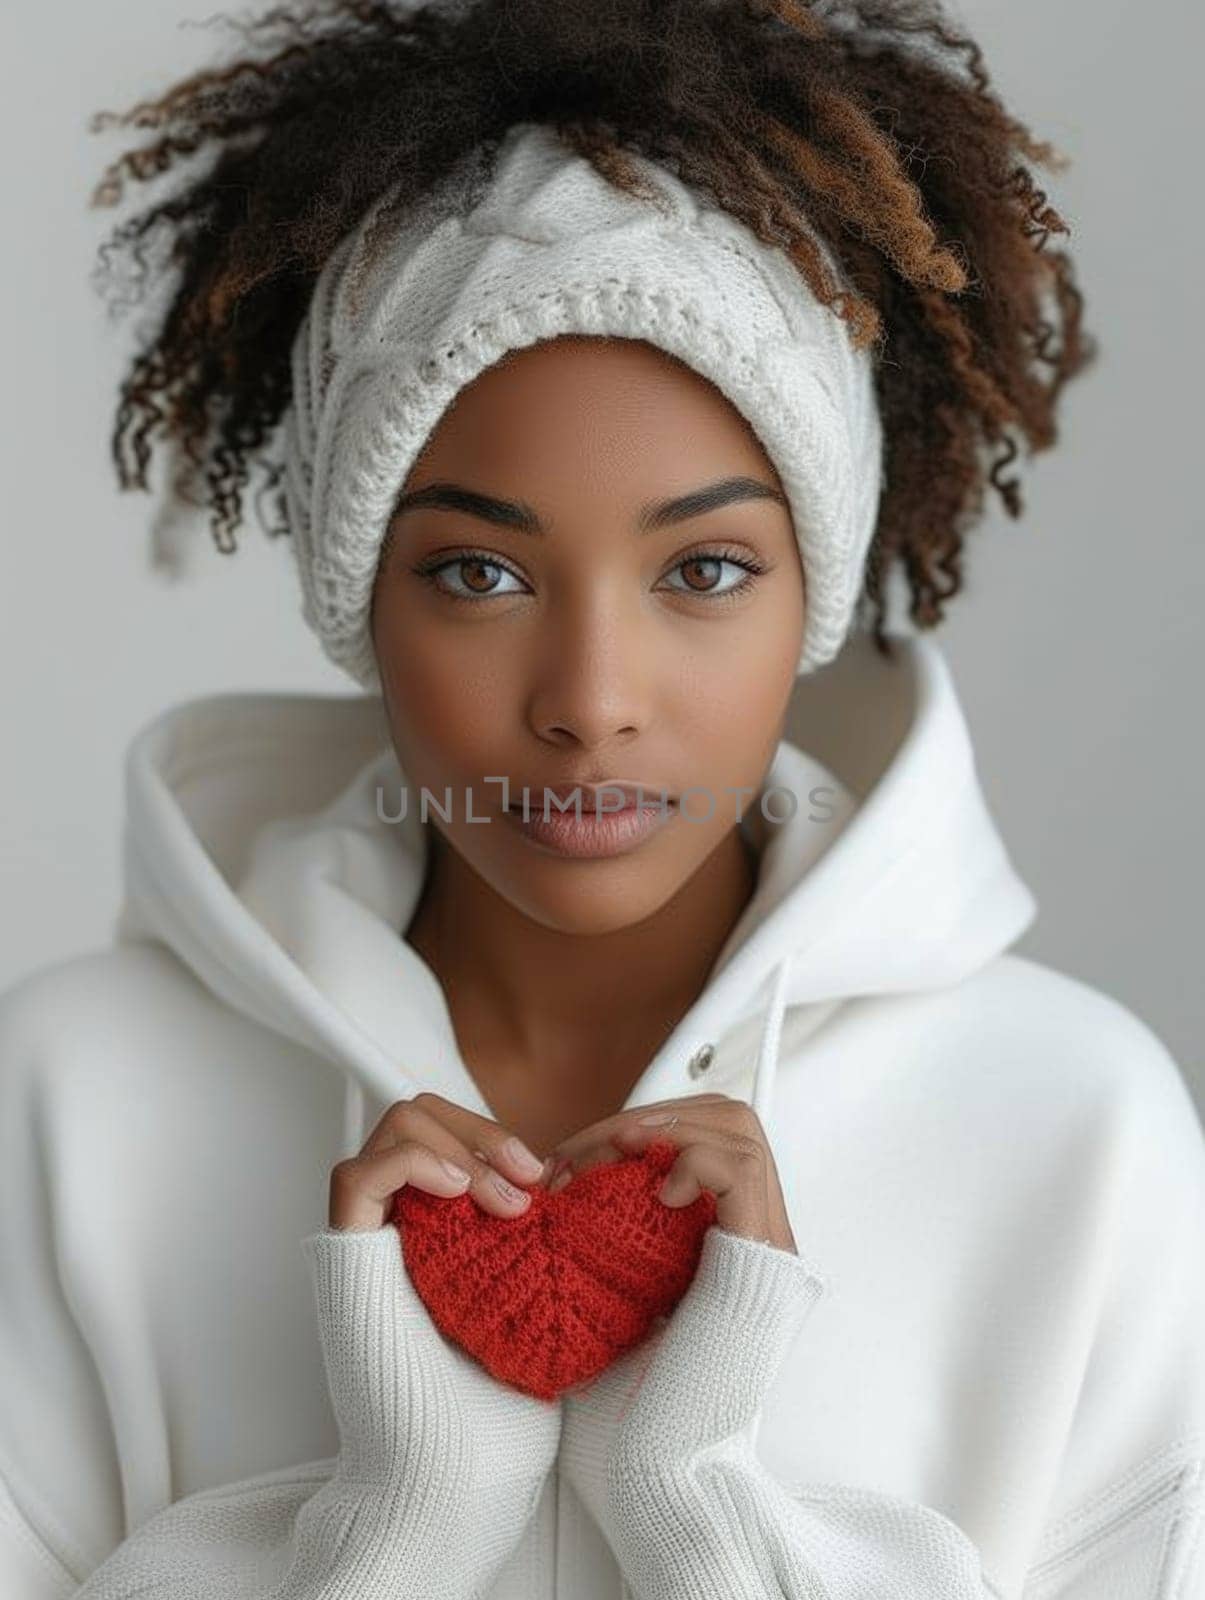 An African American woman is holding a red heart while wearing a white hoodie.